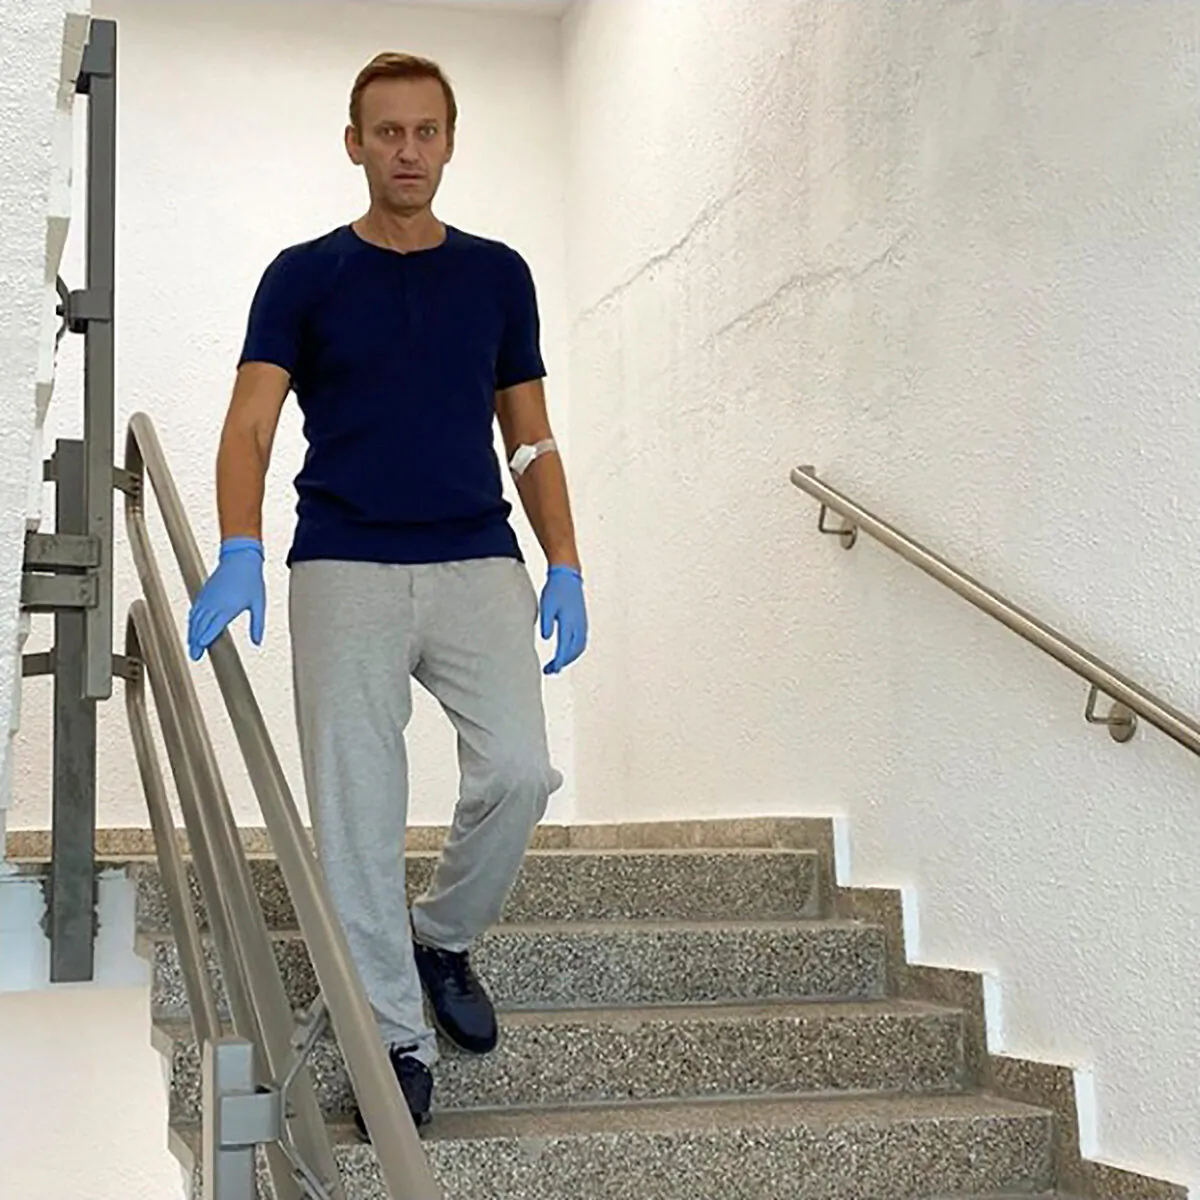 Russian opposition politician Alexei Navalny goes downstairs at Charite hospital in Berlin, Germany, in this undated image obtained from social media, on Sept. 19, 2020. (Courtesy of Instagram @NAVALNY/Social Media via Reuters)